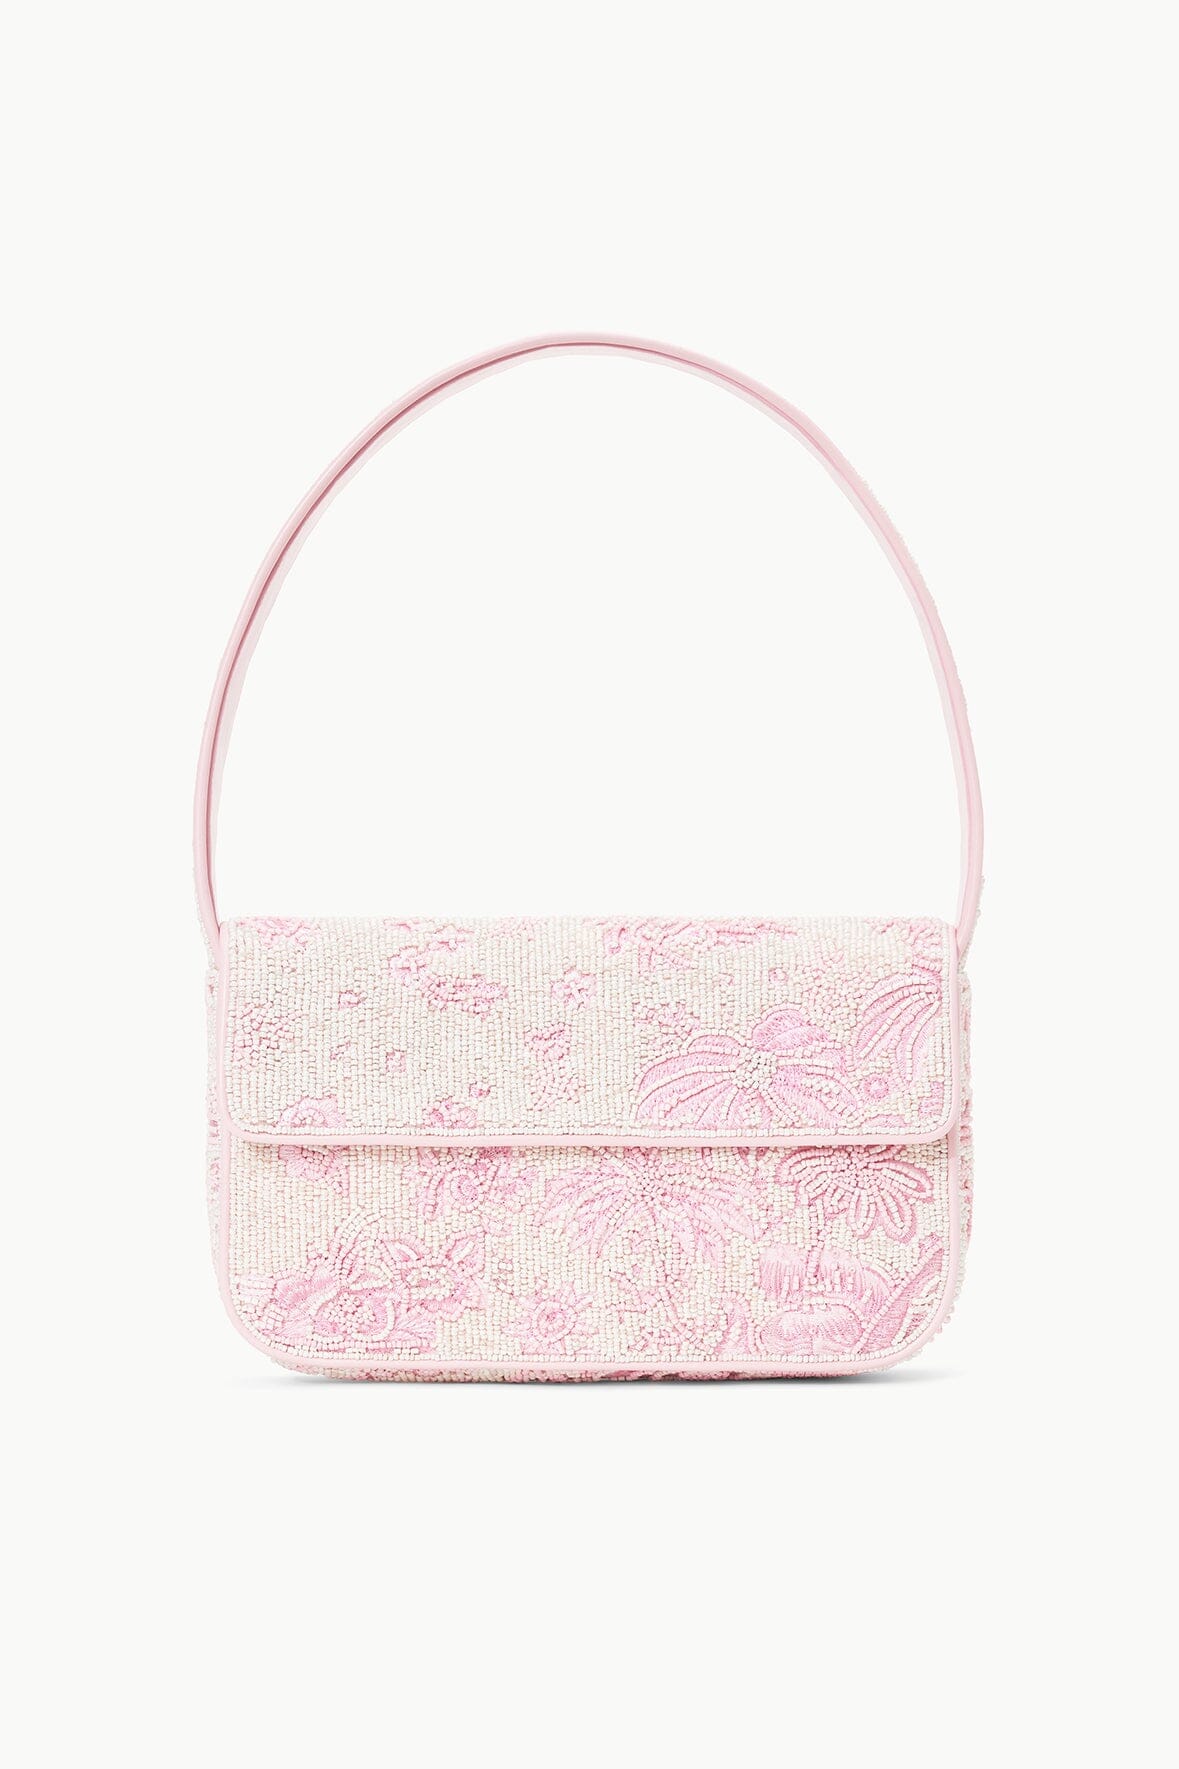 STAUD TOMMY BAG IVORY CHERRY BLOSSOM TOILE